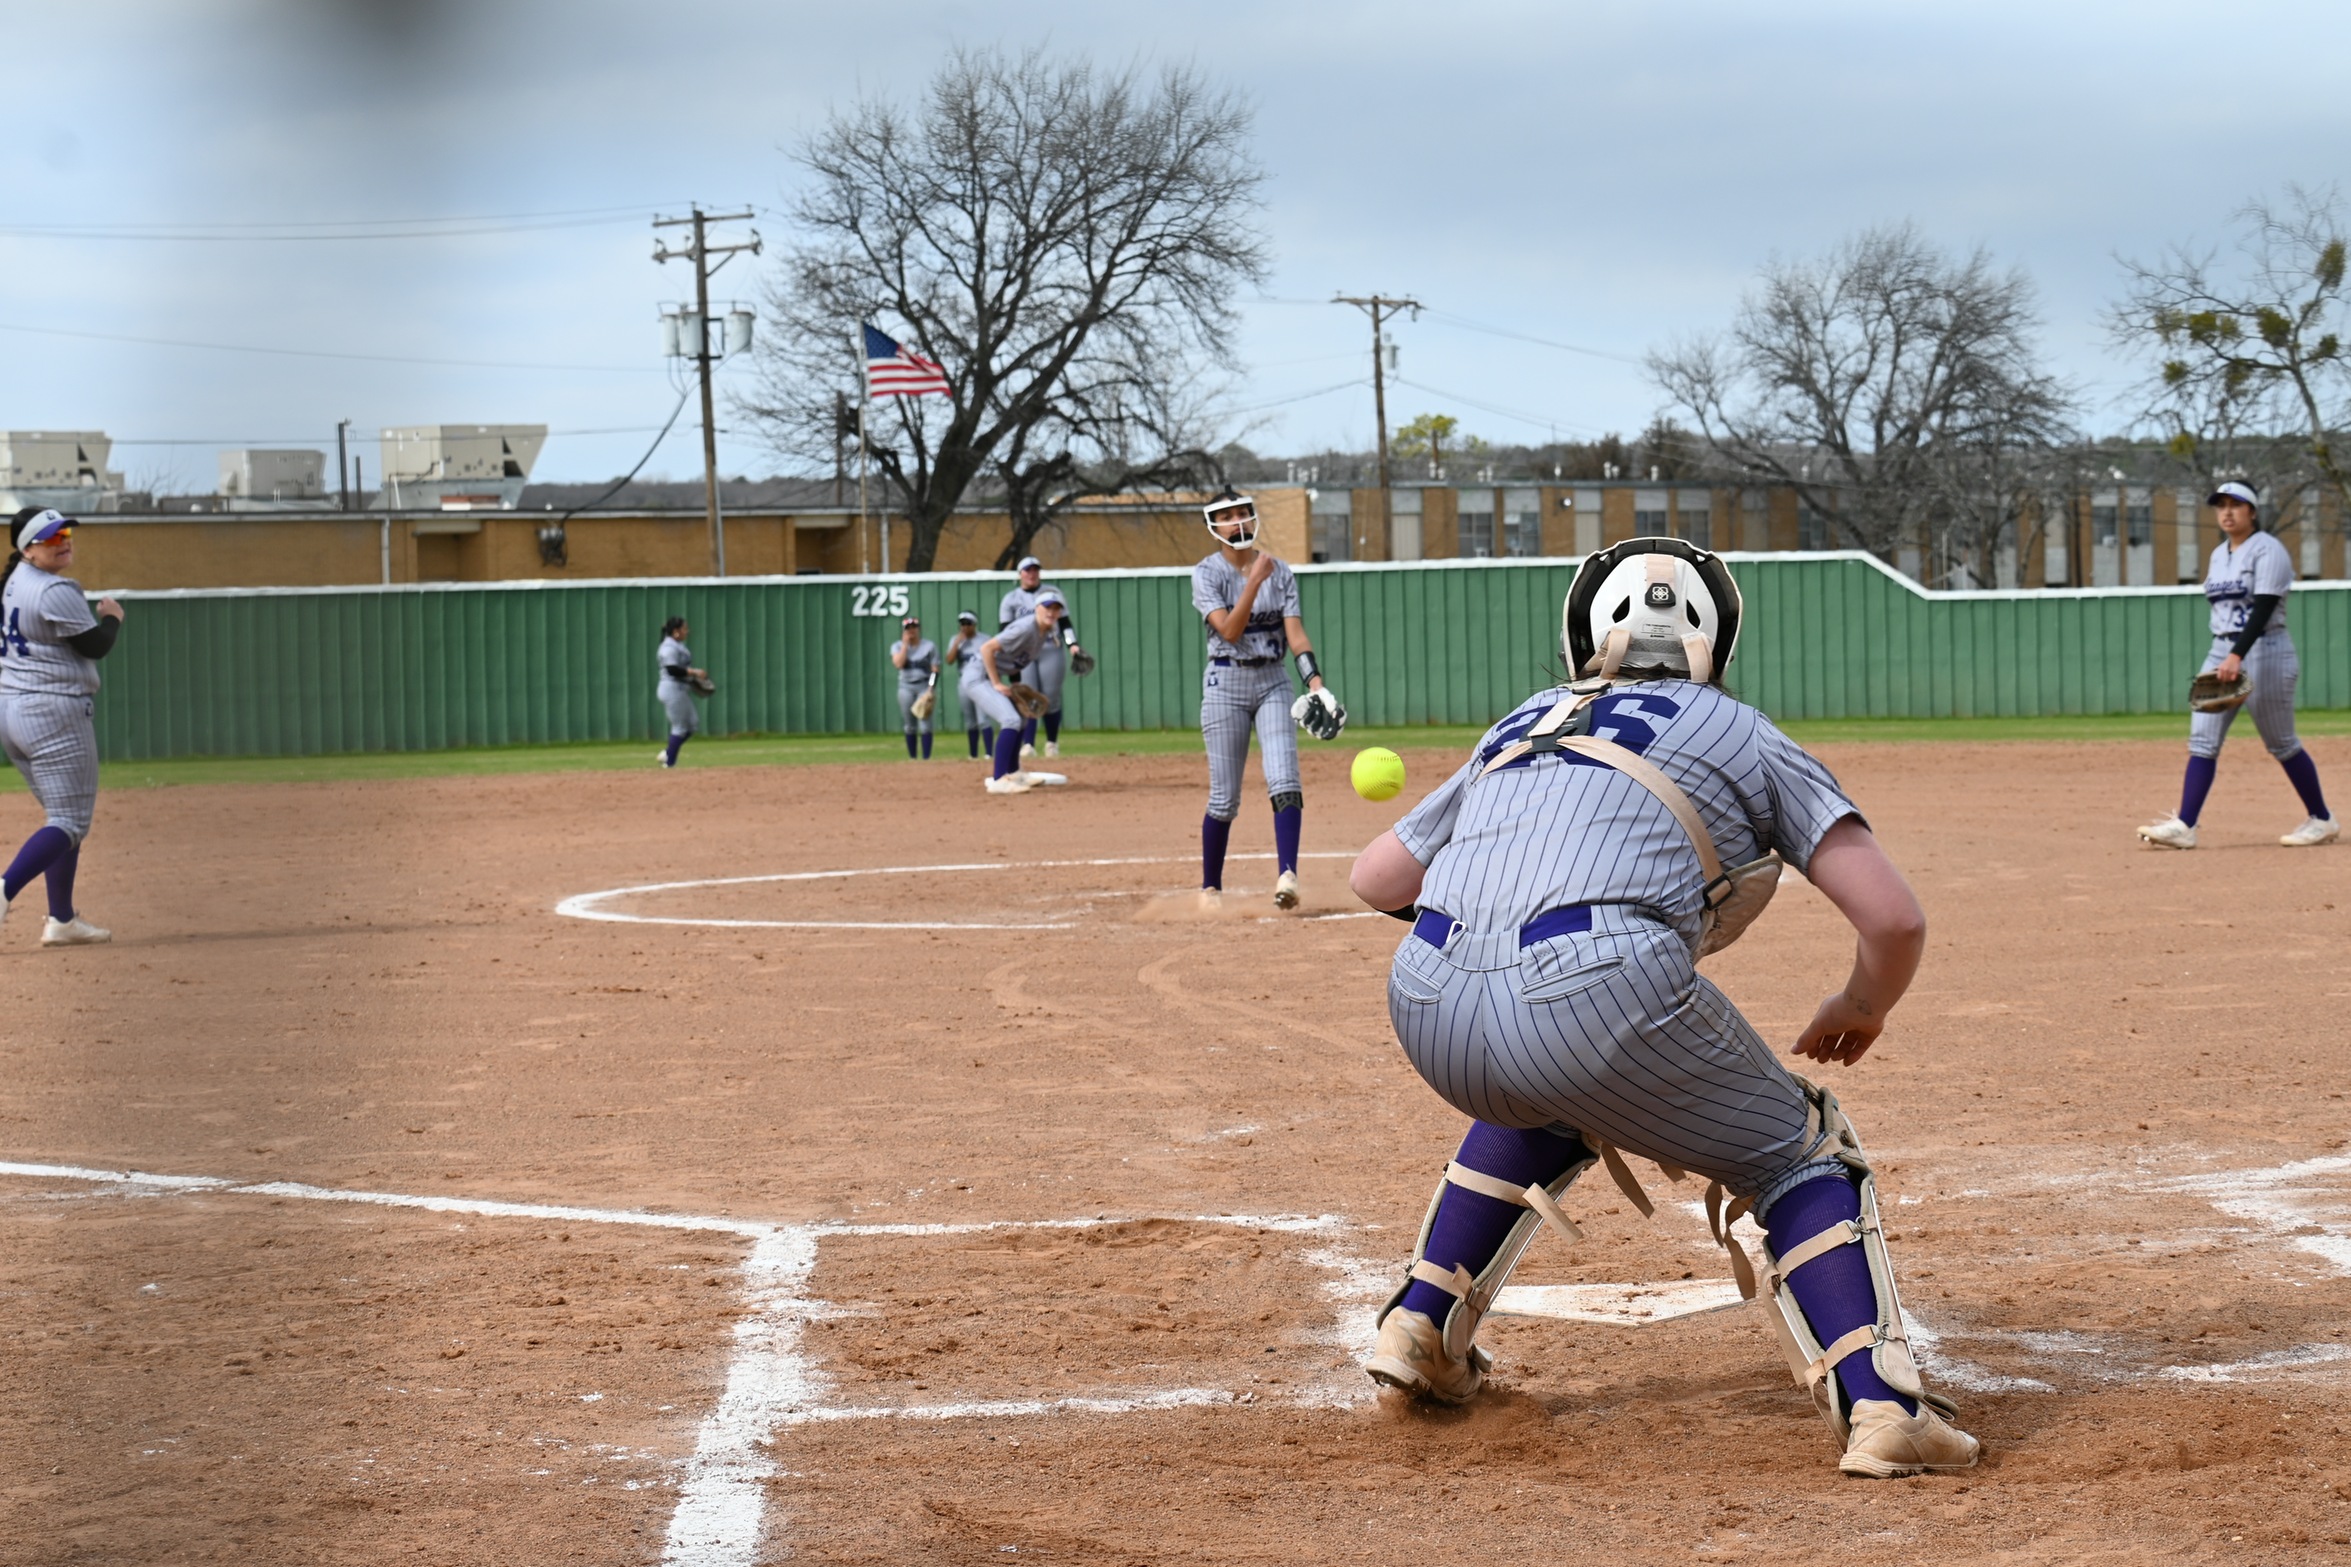 Ranger College Softball split the series with Western Texas College